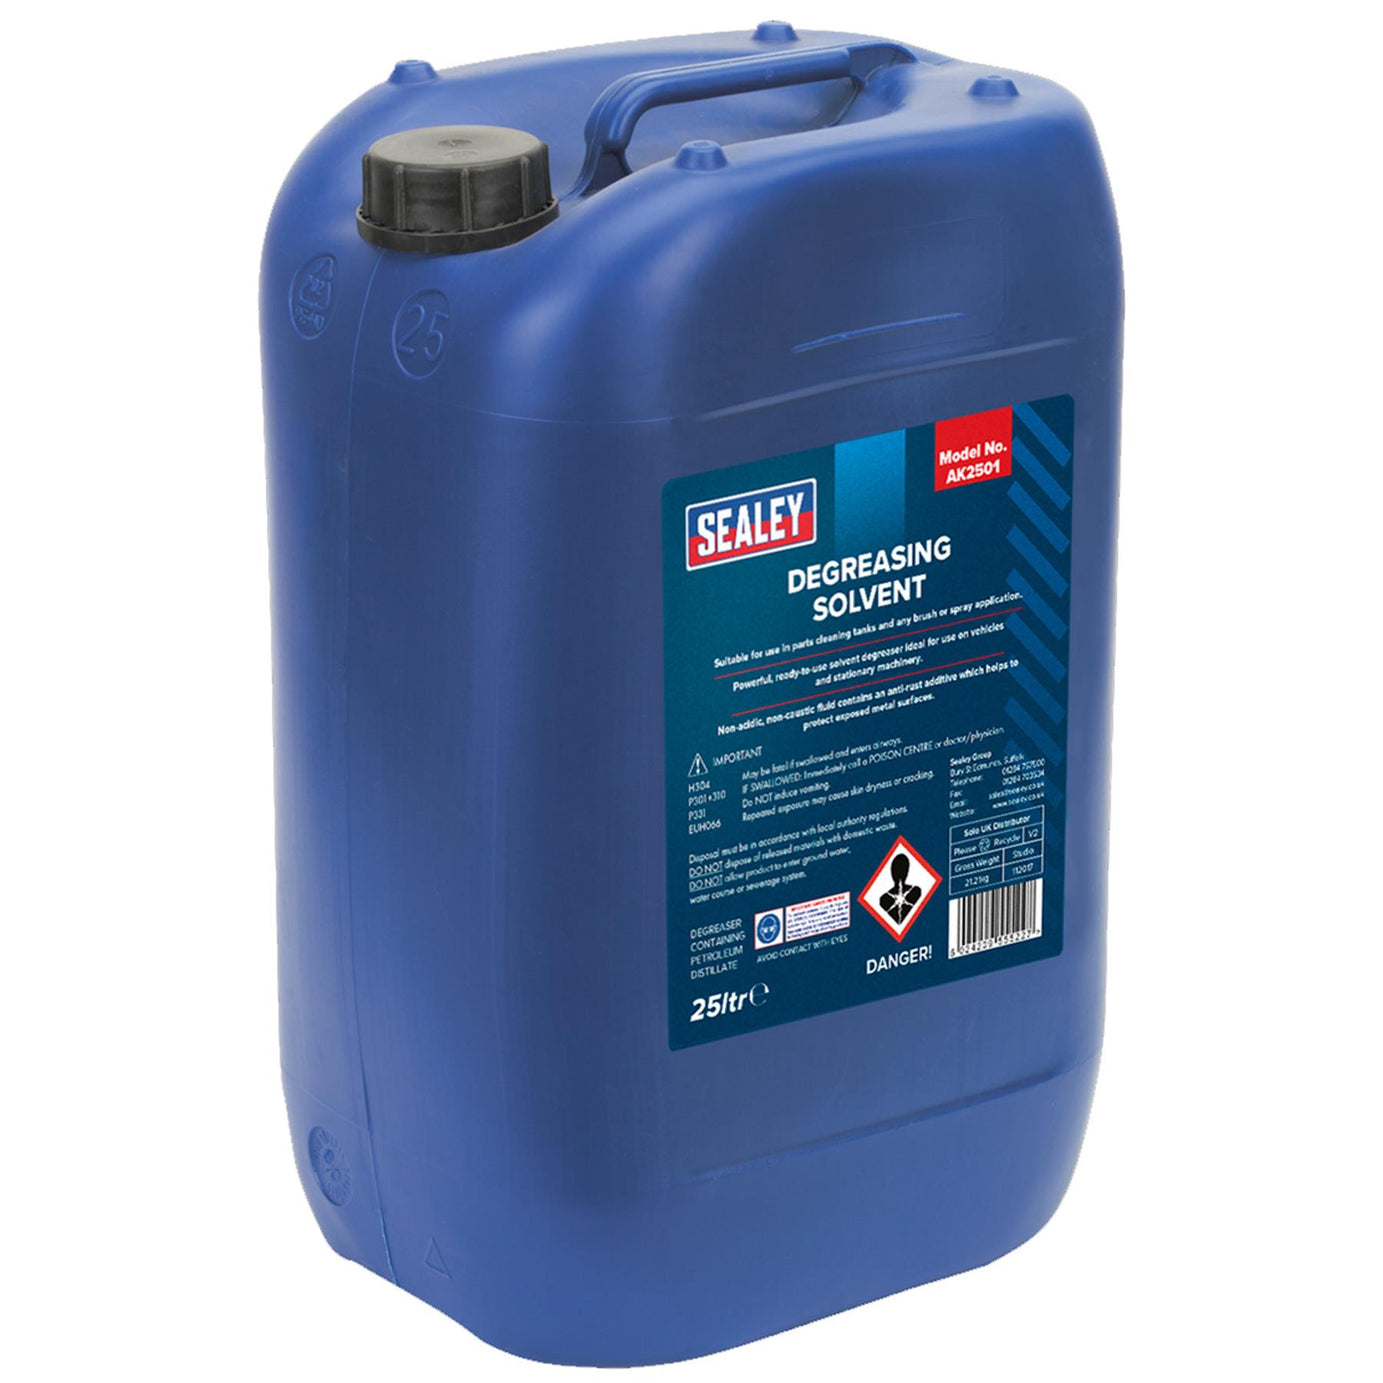 Sealey Degreasing Solvent 25L